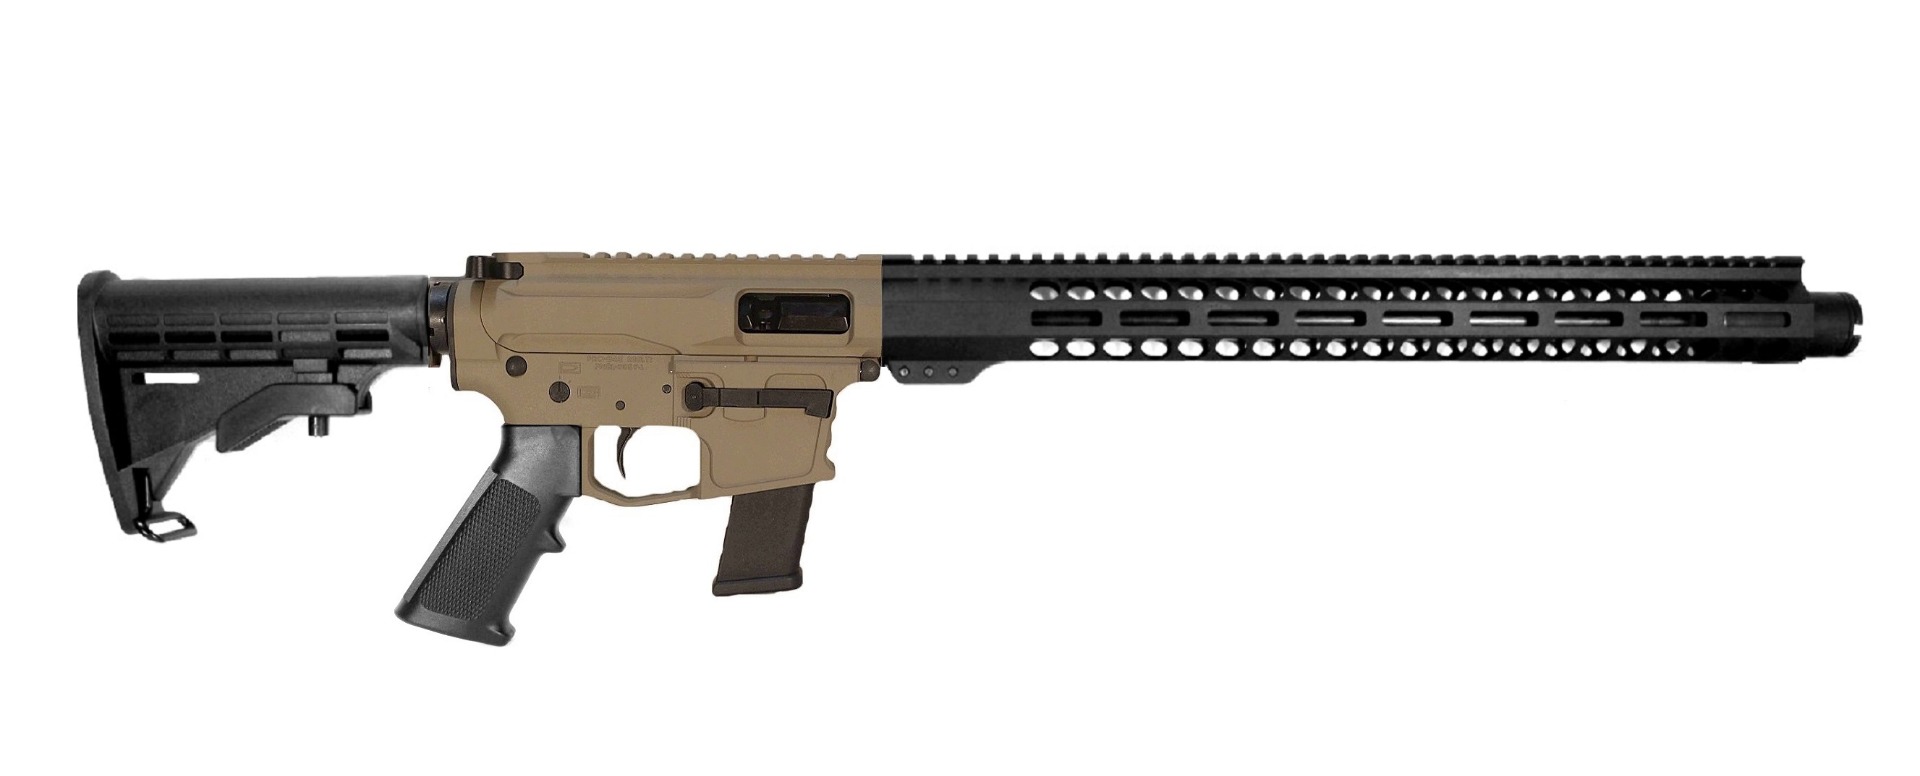 16 inch 45 ACP AR45 Rifle | Milspec or Better | USA MADE